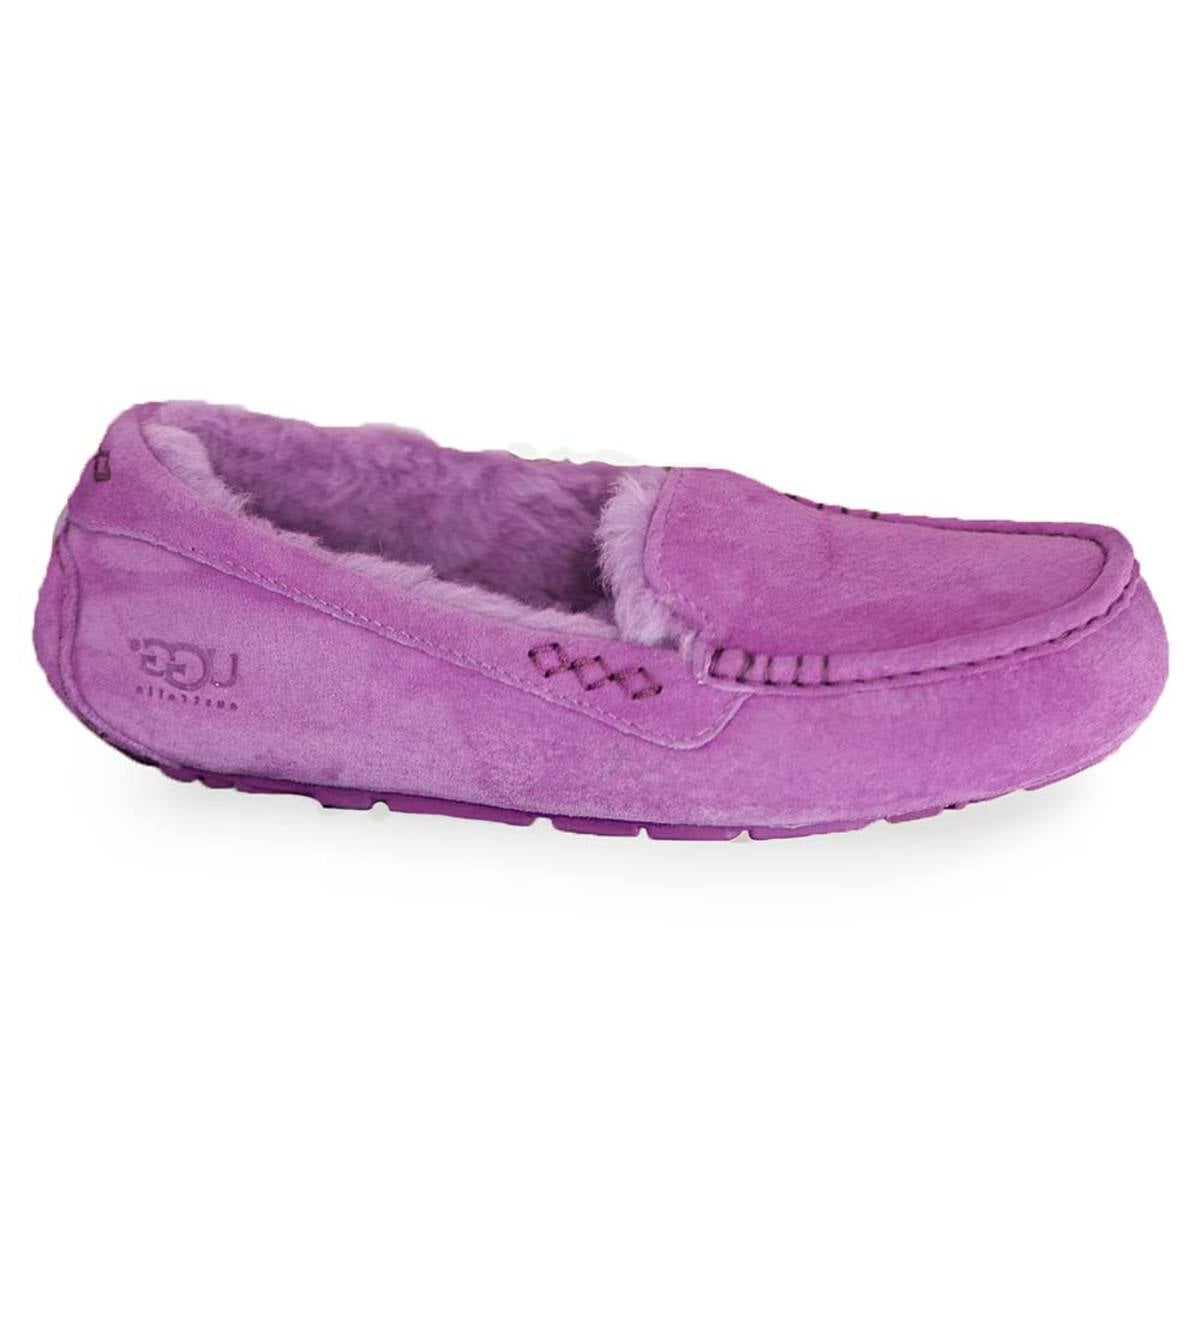 UGG Ansley Moccasin Slippers - Crazy Plum - Size 5